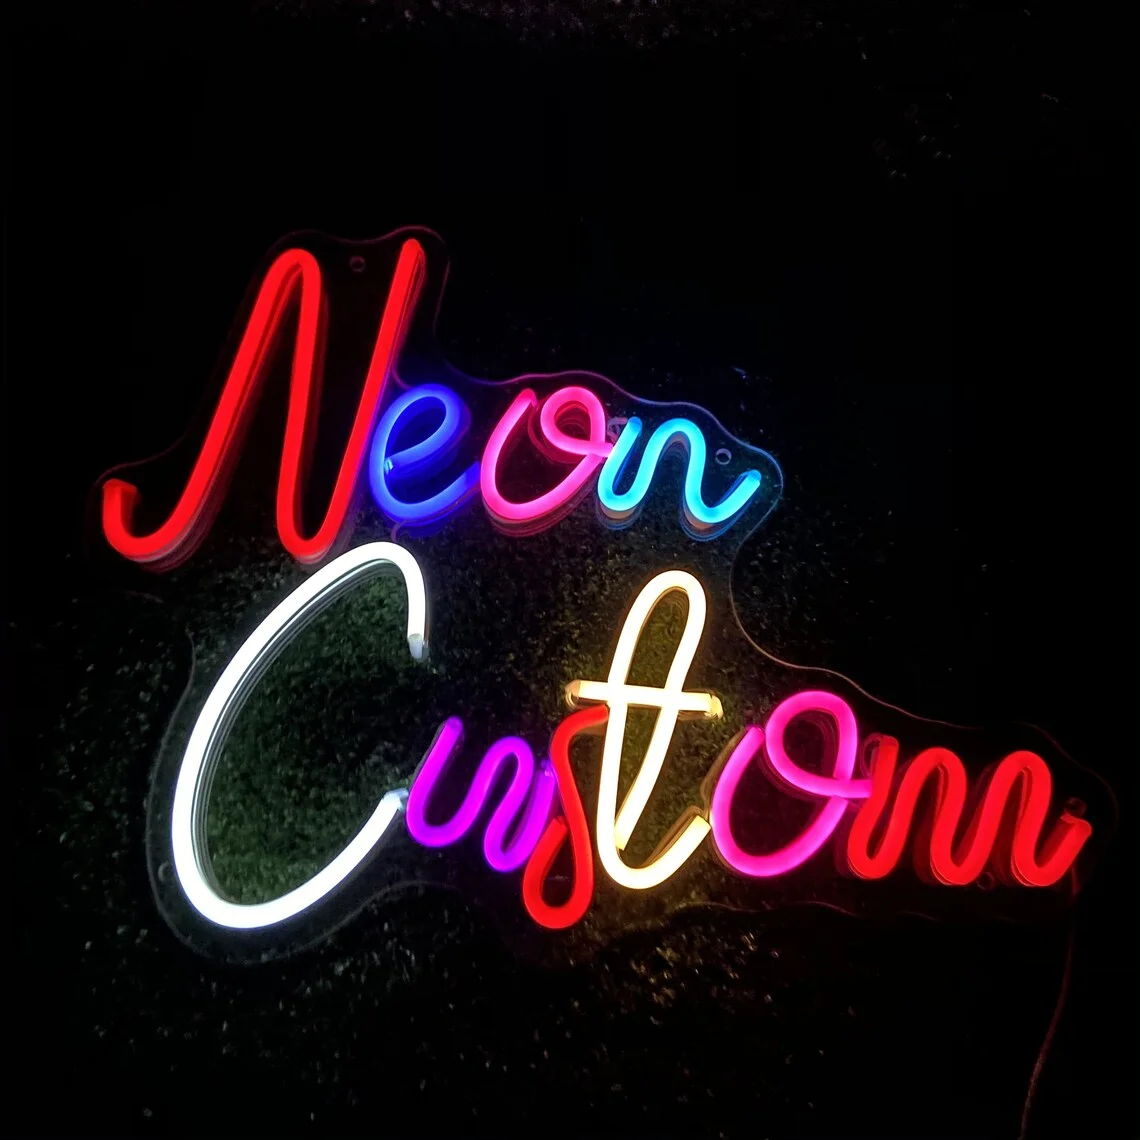 Custom Neon Sign Personalised Business Logo Customize Name Led Neon Light Birthday Party Wedding Room Decoration Night Lamp Sign